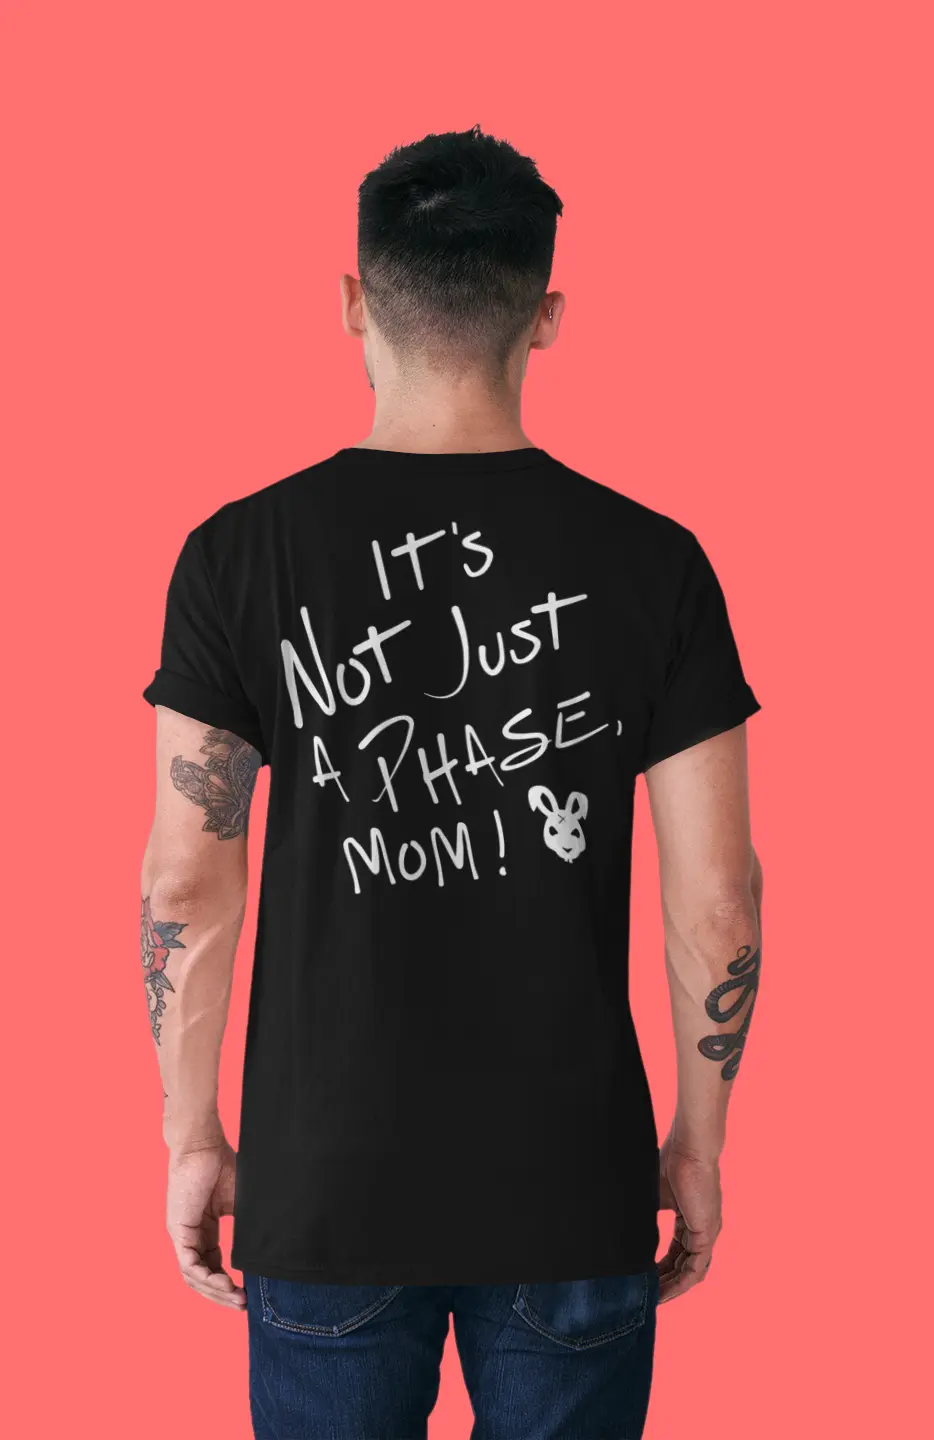 It's not just a phase mom t-shirt